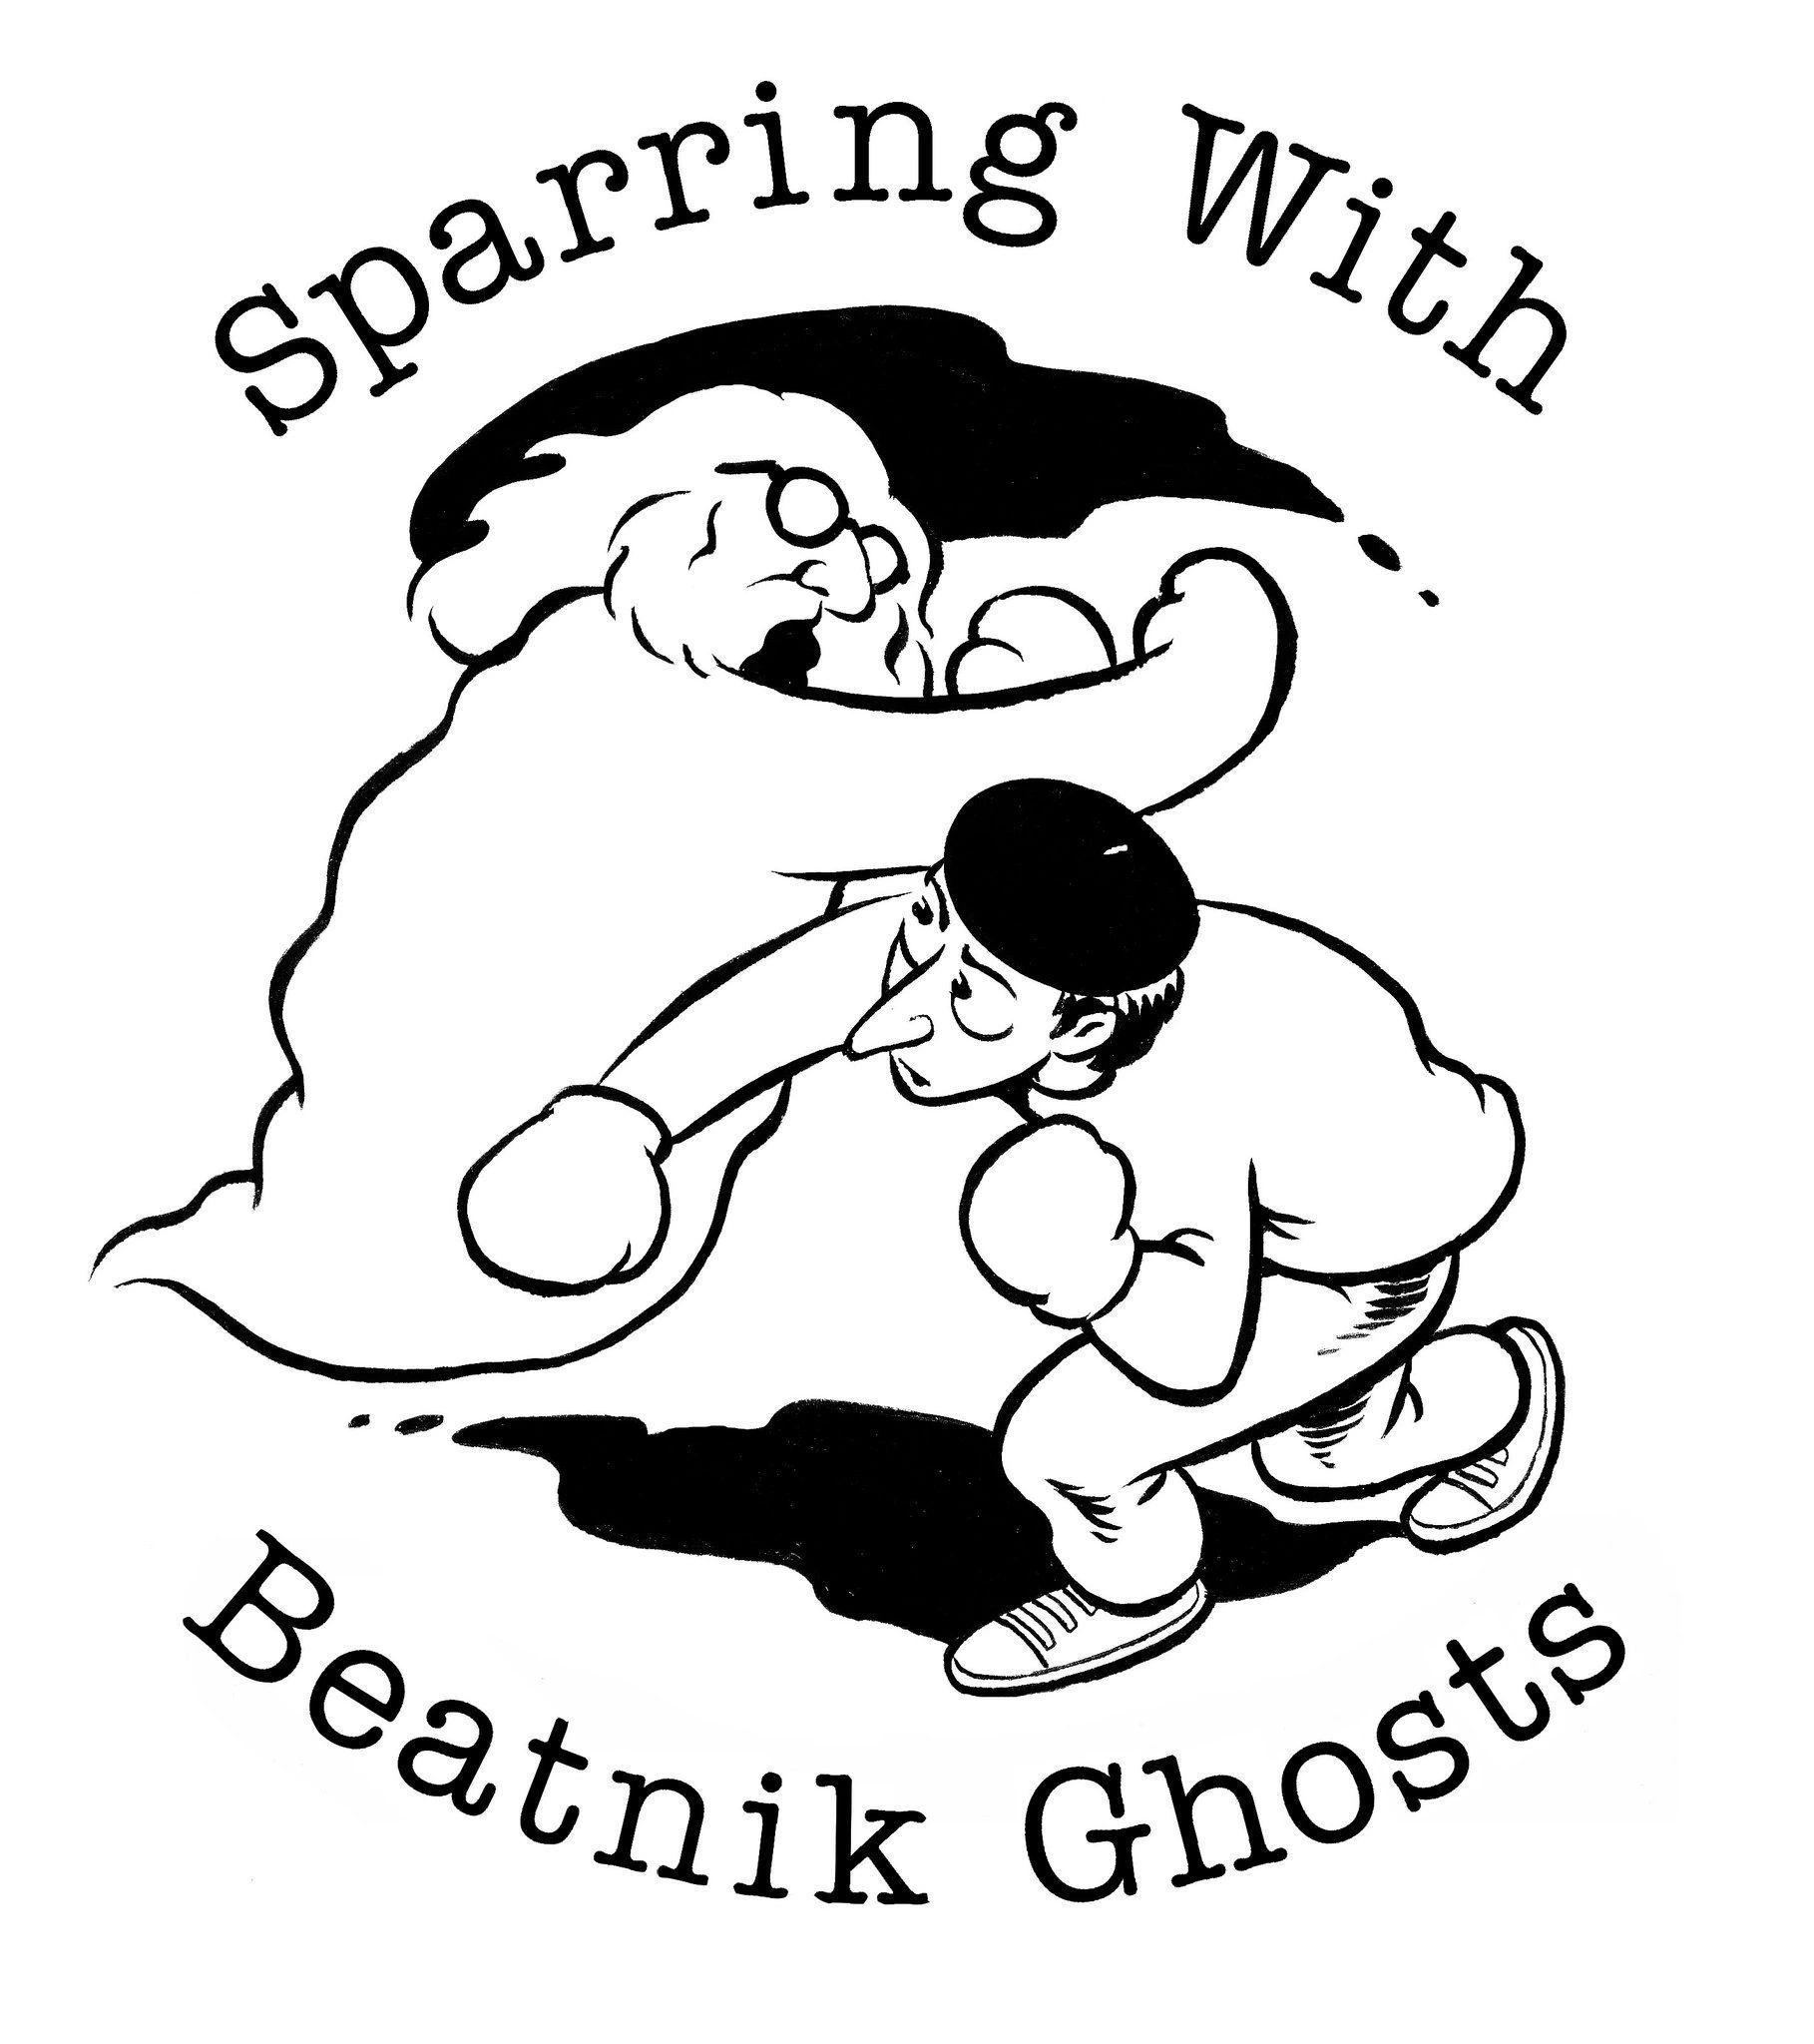 Sparring With Beatnik Ghosts logo